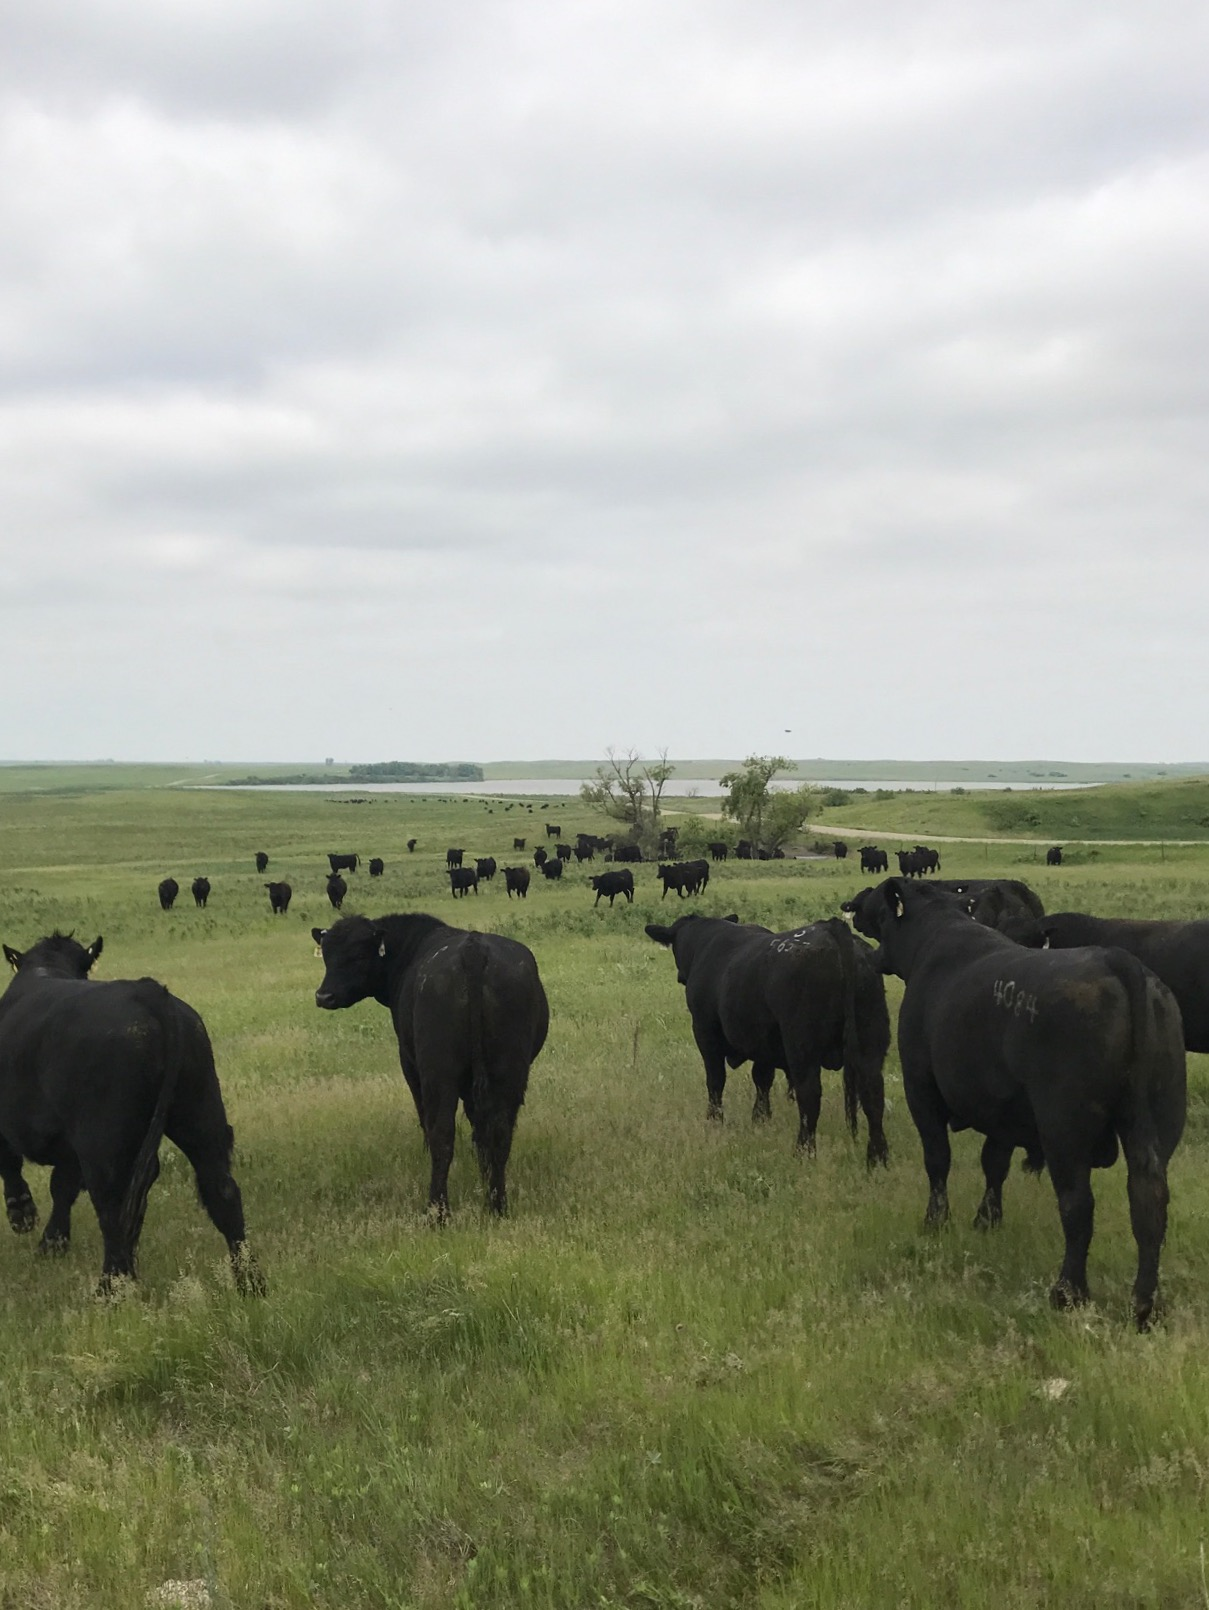 Morning Ag News, April 11, 2022: U.S. beef exports strong in February